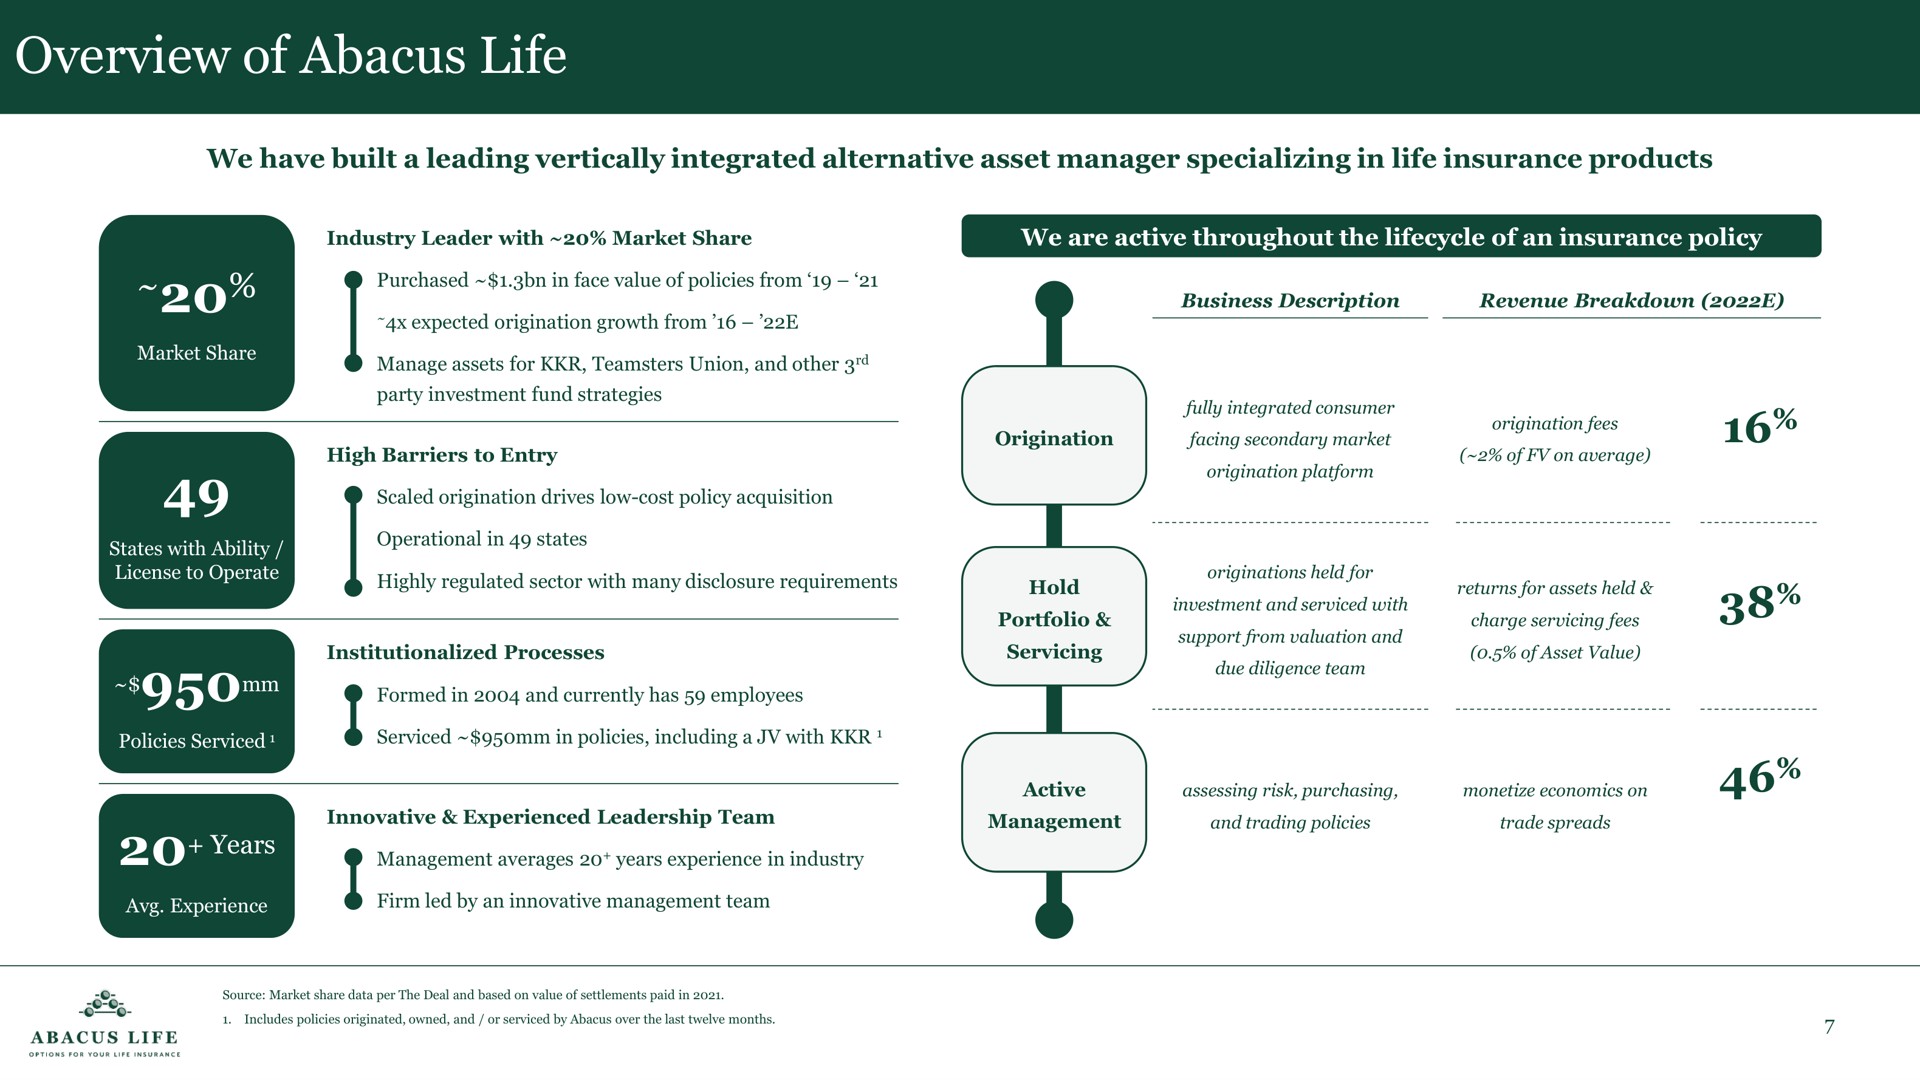 overview of abacus life | Abacus Life